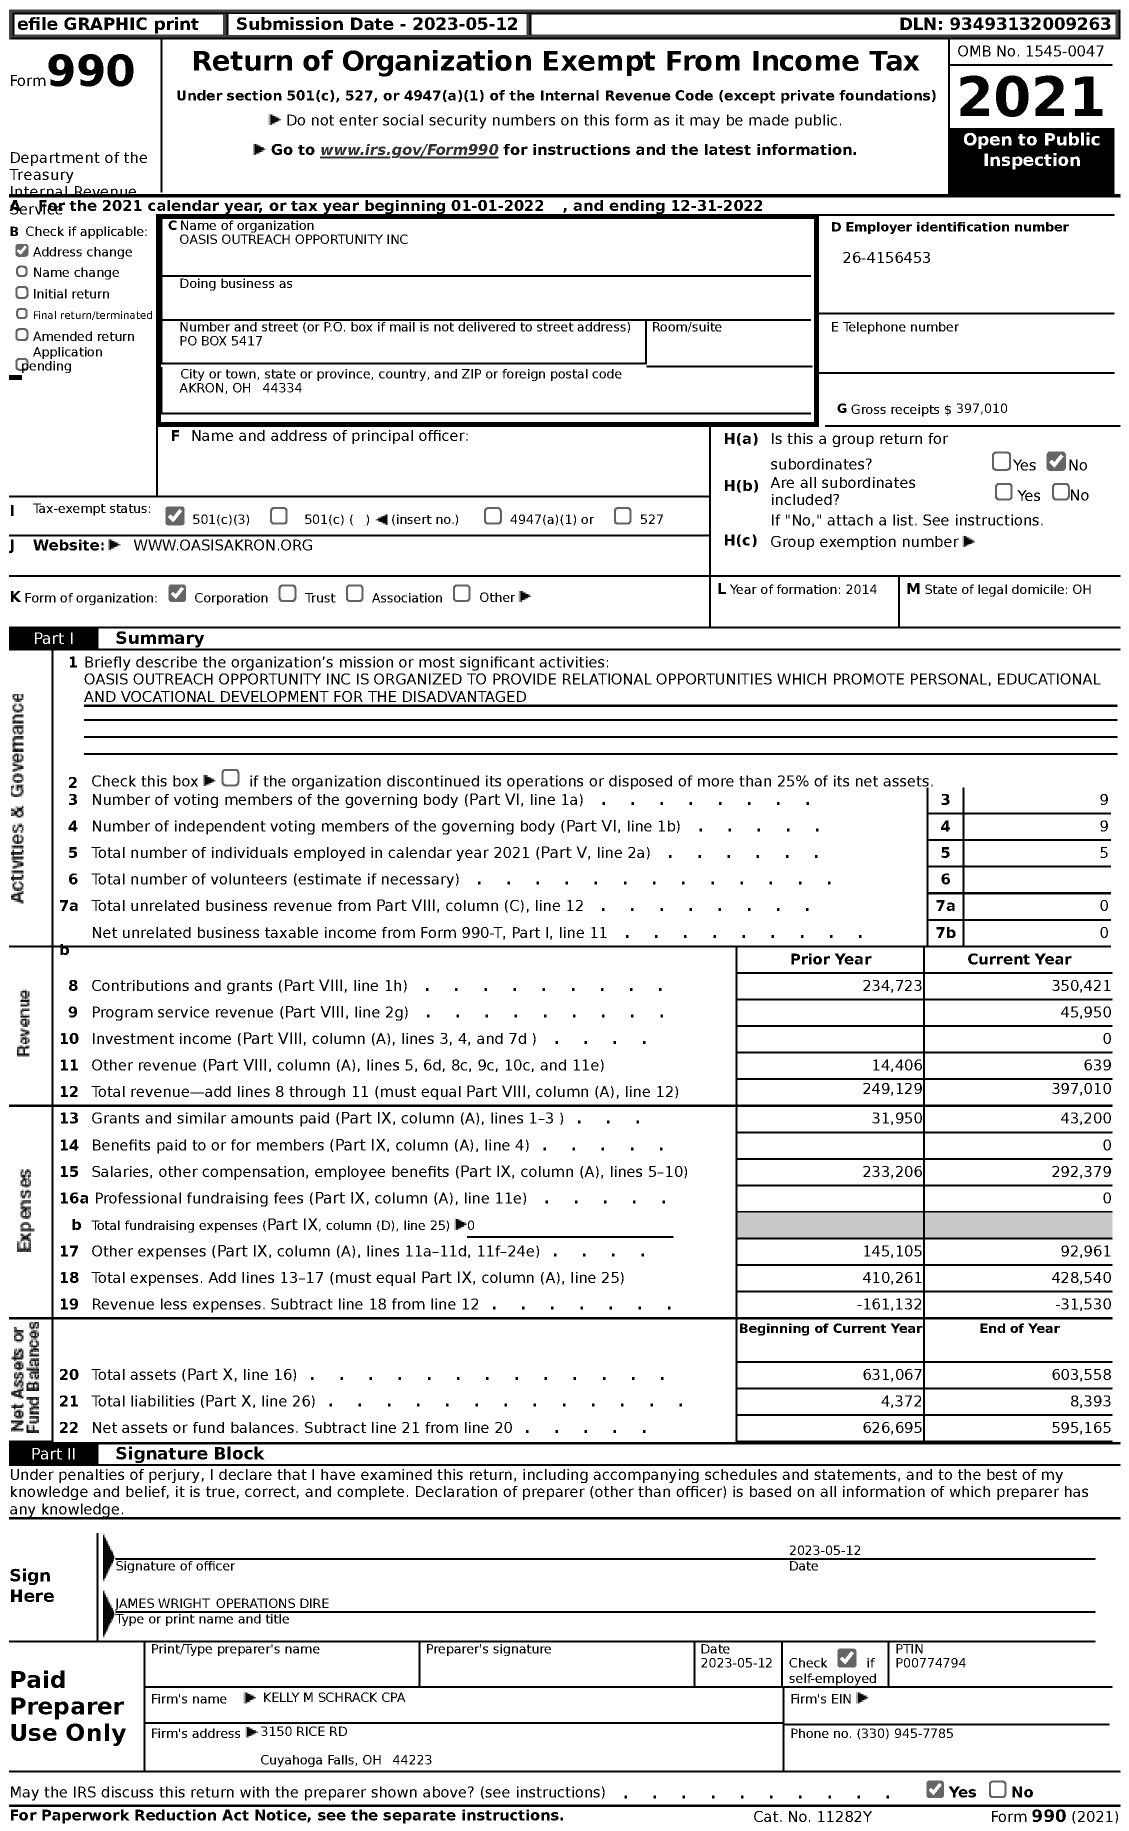 Image of first page of 2022 Form 990 for Oasis Outreach Opportunity